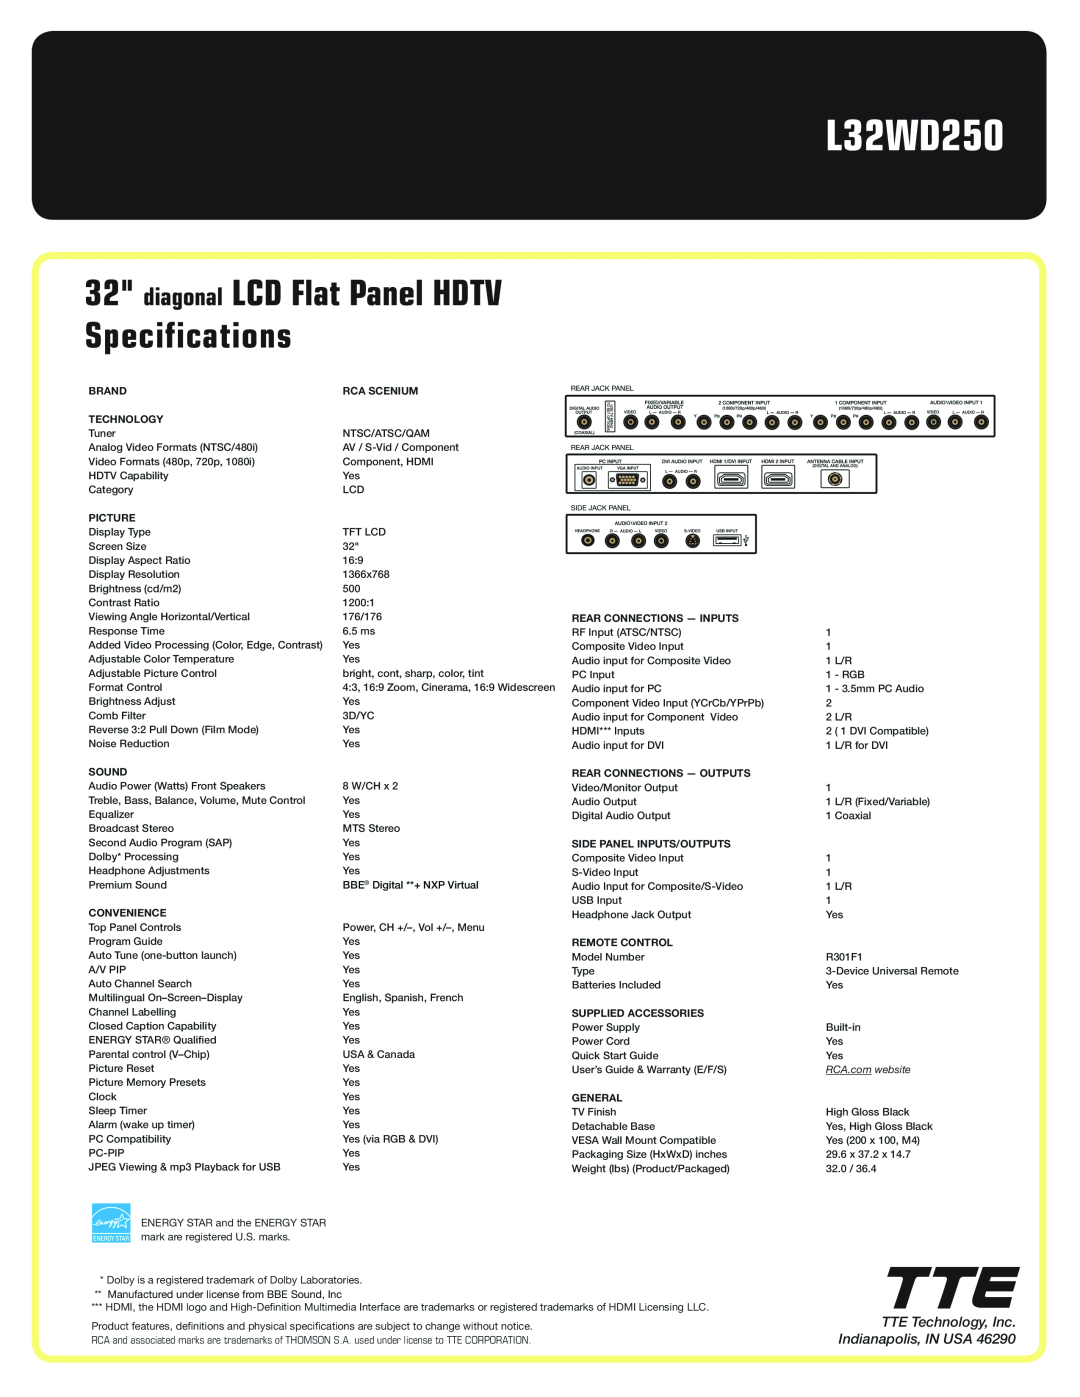 RCA L32WD250 manual diagonal LCD Flat Panel HDTV Specifications, TTE Technology, Inc. Indianapolis, IN USA, RCA.com website 